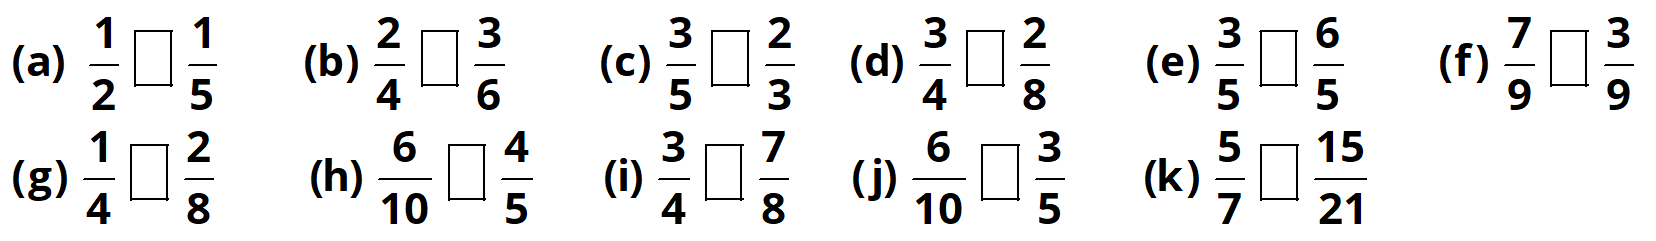 NCERT Solutions for Class 6 Maths, Chapter 7, Fractions, Exercise 7.4 q.5